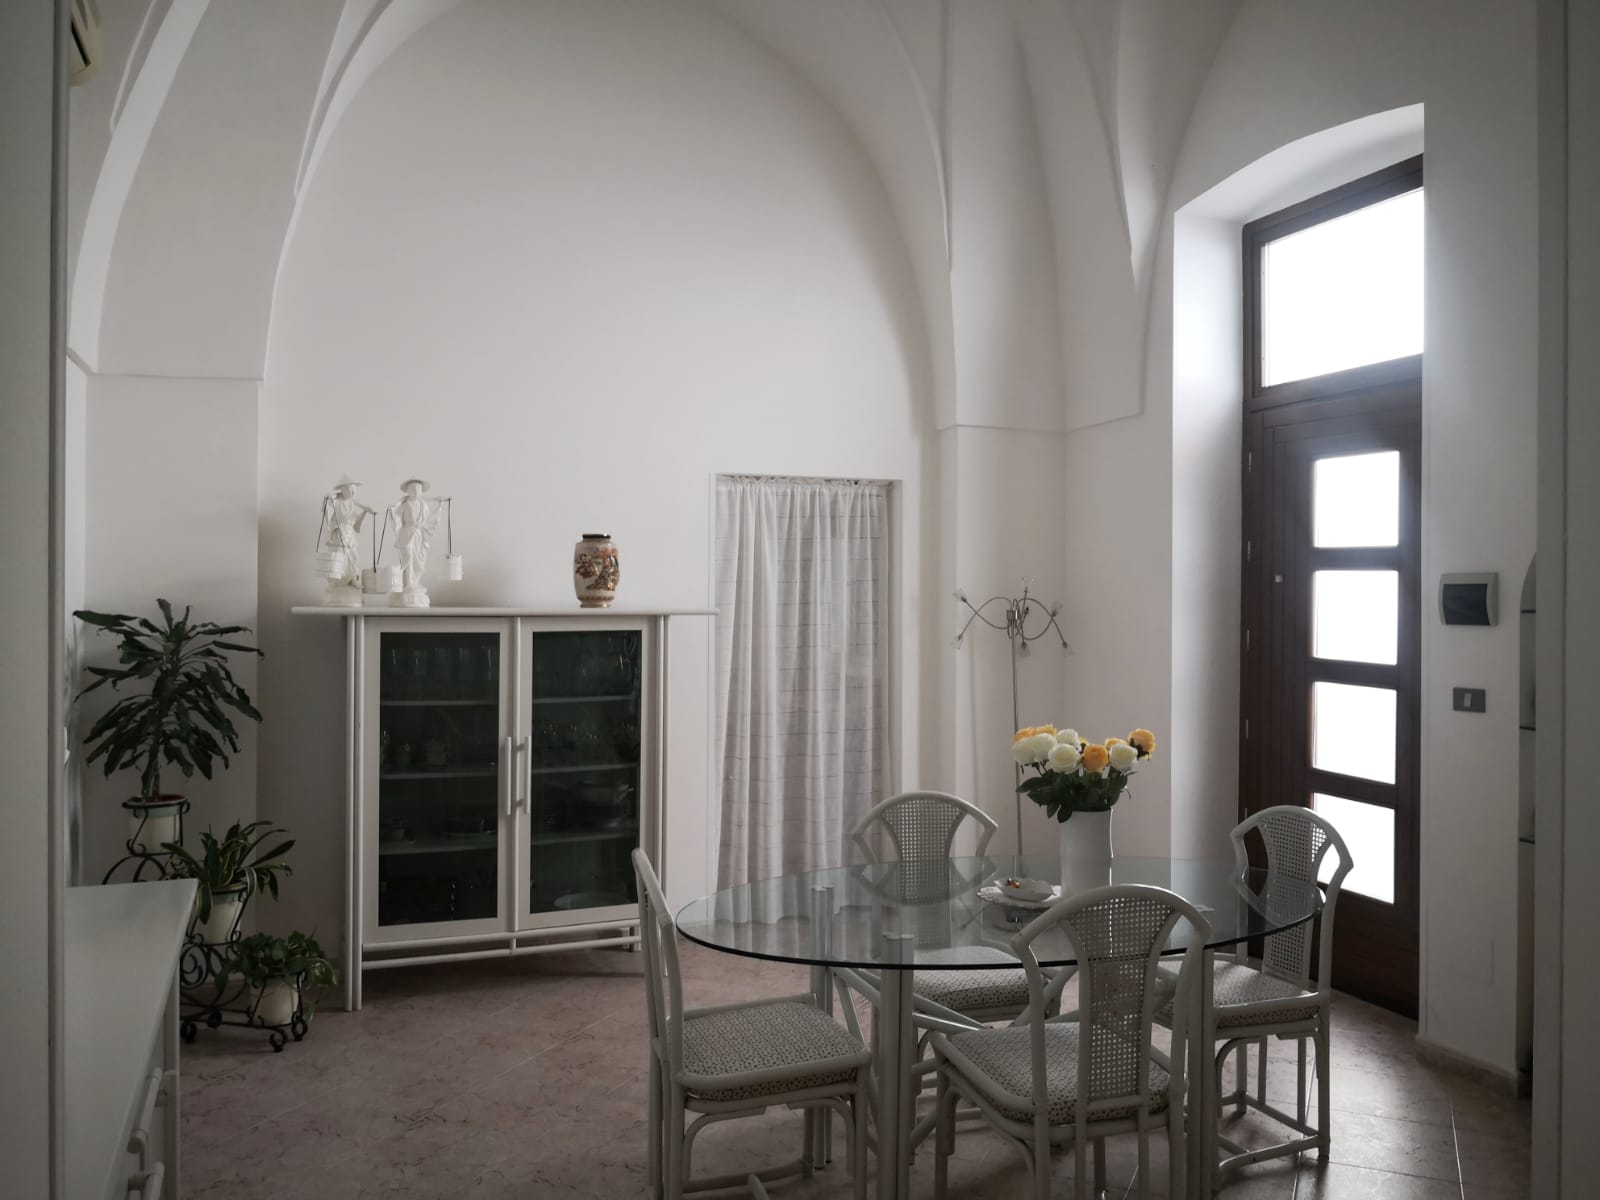 aam 609 Bel Appartamento in affitto/Brindisi- Nice Apartment to rent in Brindisi